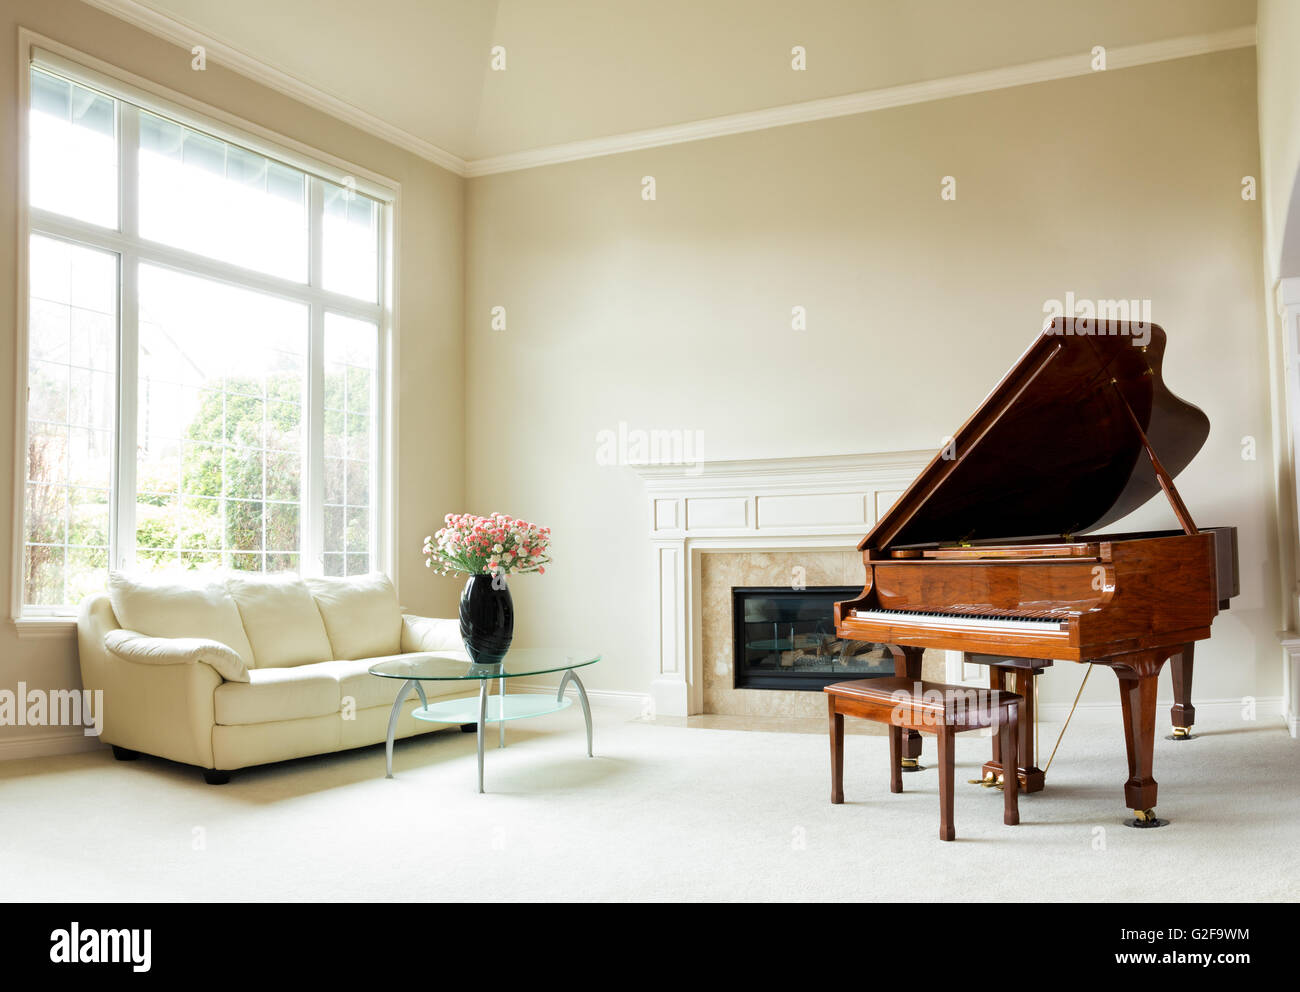 Living room with grand piano, fireplace, sofa and large window with bright daylight coming through. Stock Photo